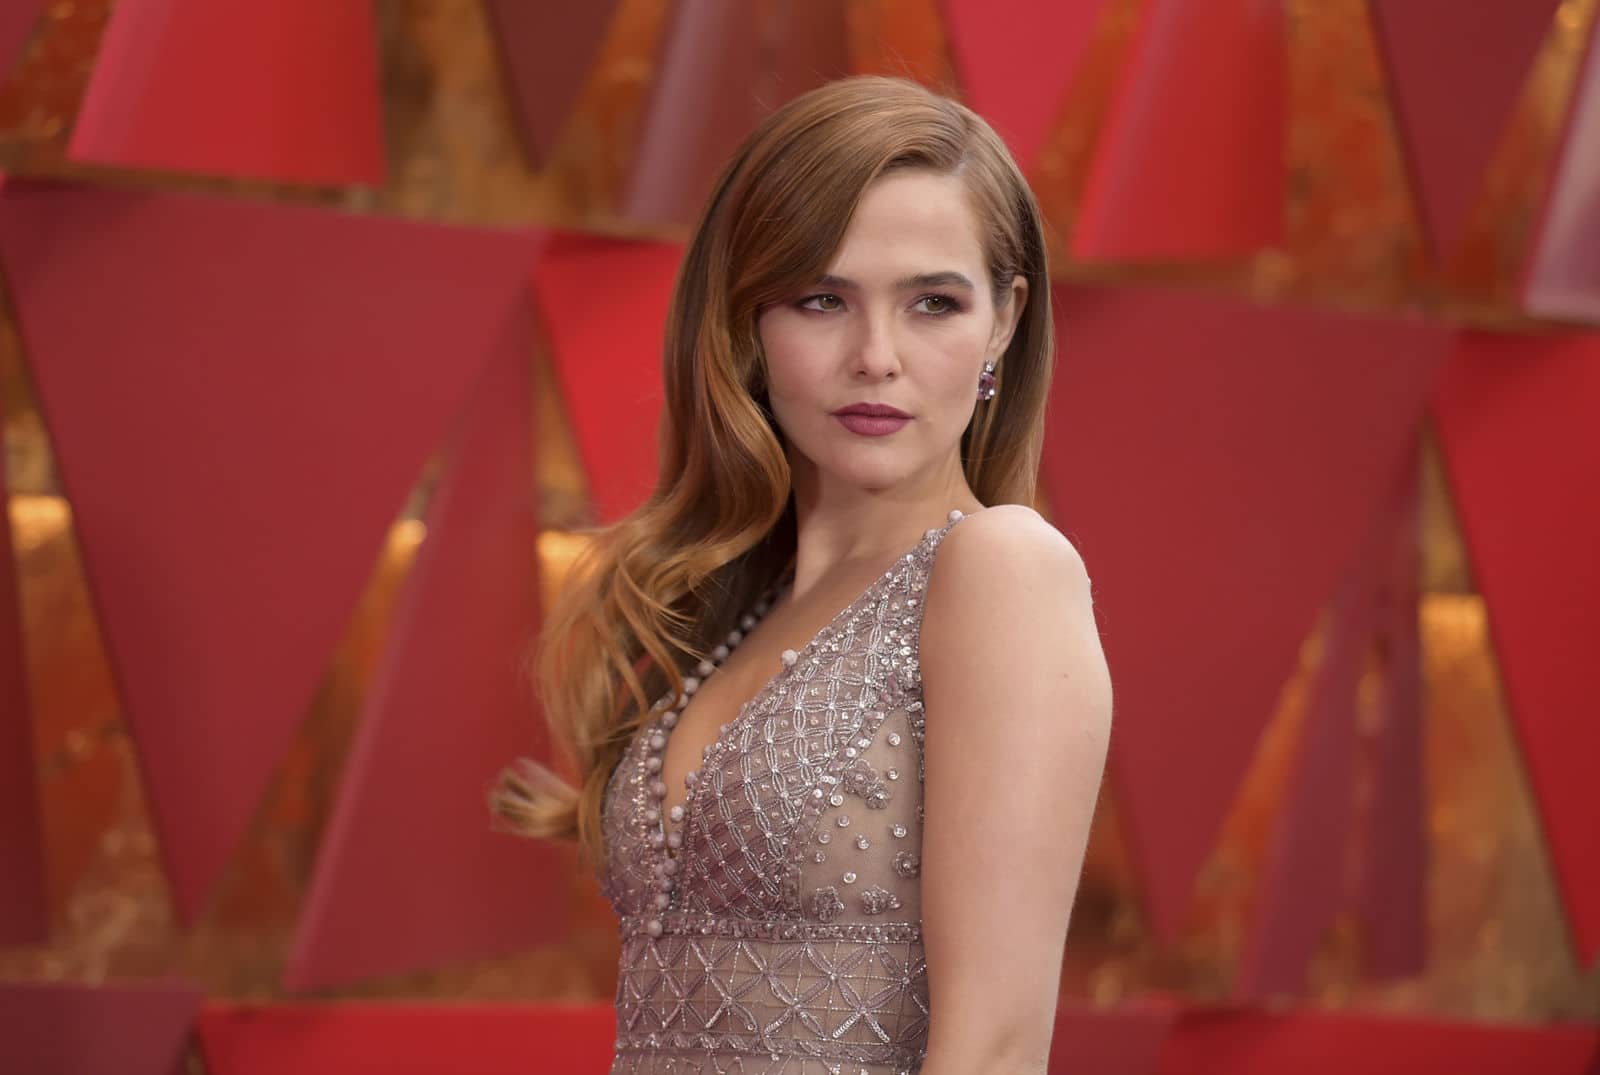 Zoey Deutch arrives at the Oscars on Sunday, March 4, 2018, at the Dolby Theatre in Los Angeles. (Photo by Richard Shotwell/Invision/AP)